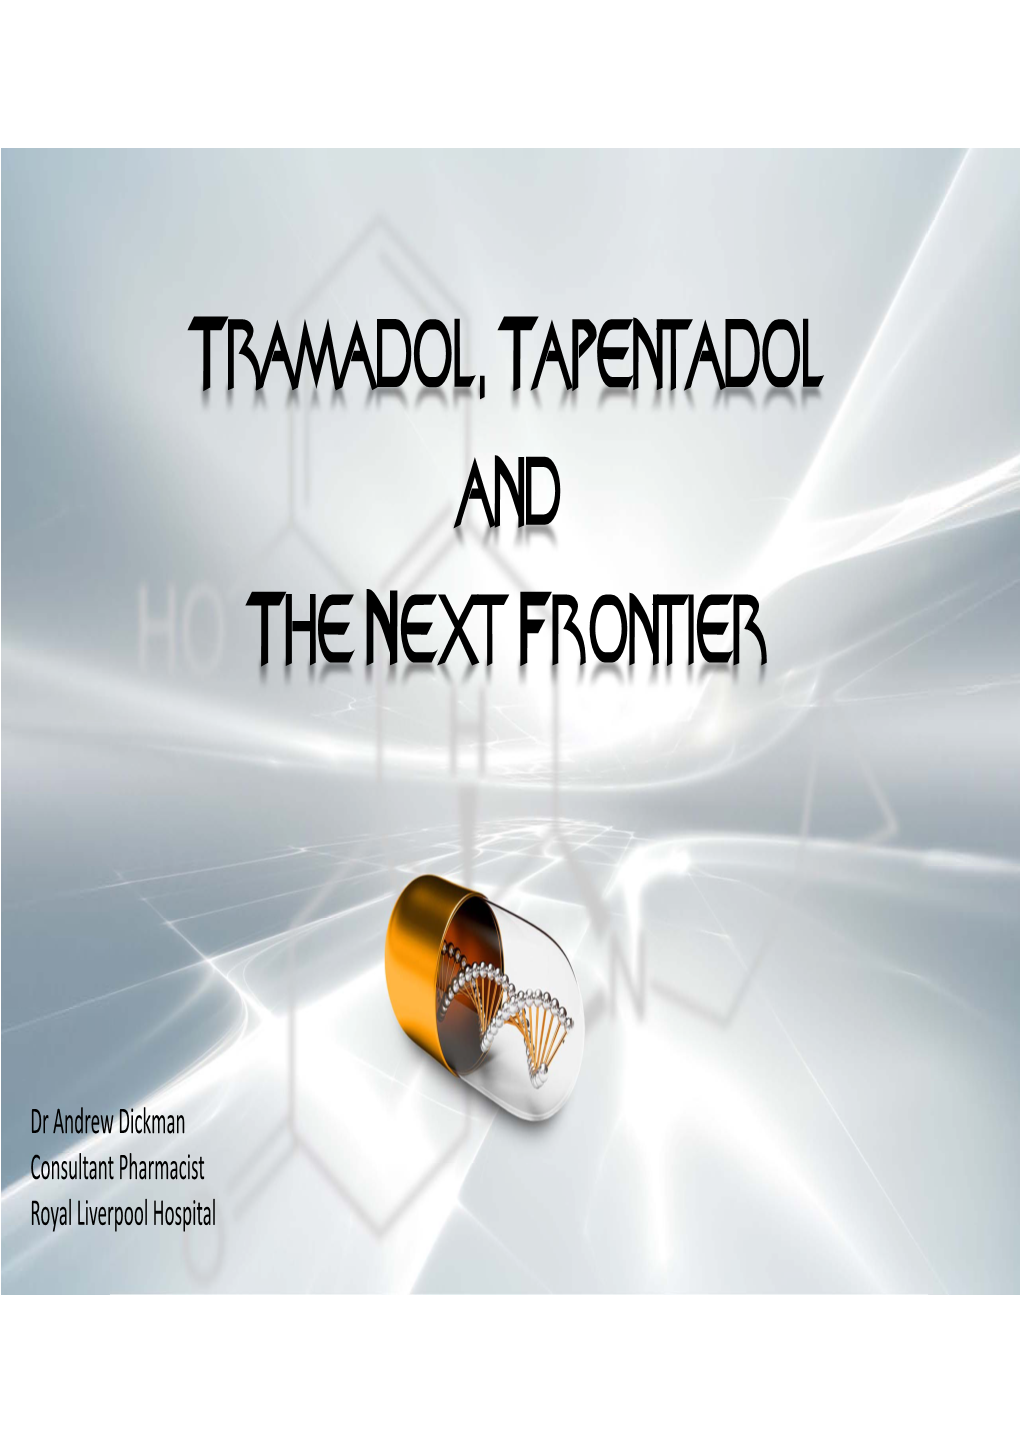 Tramadol, Tapentadol and the Next Frontier